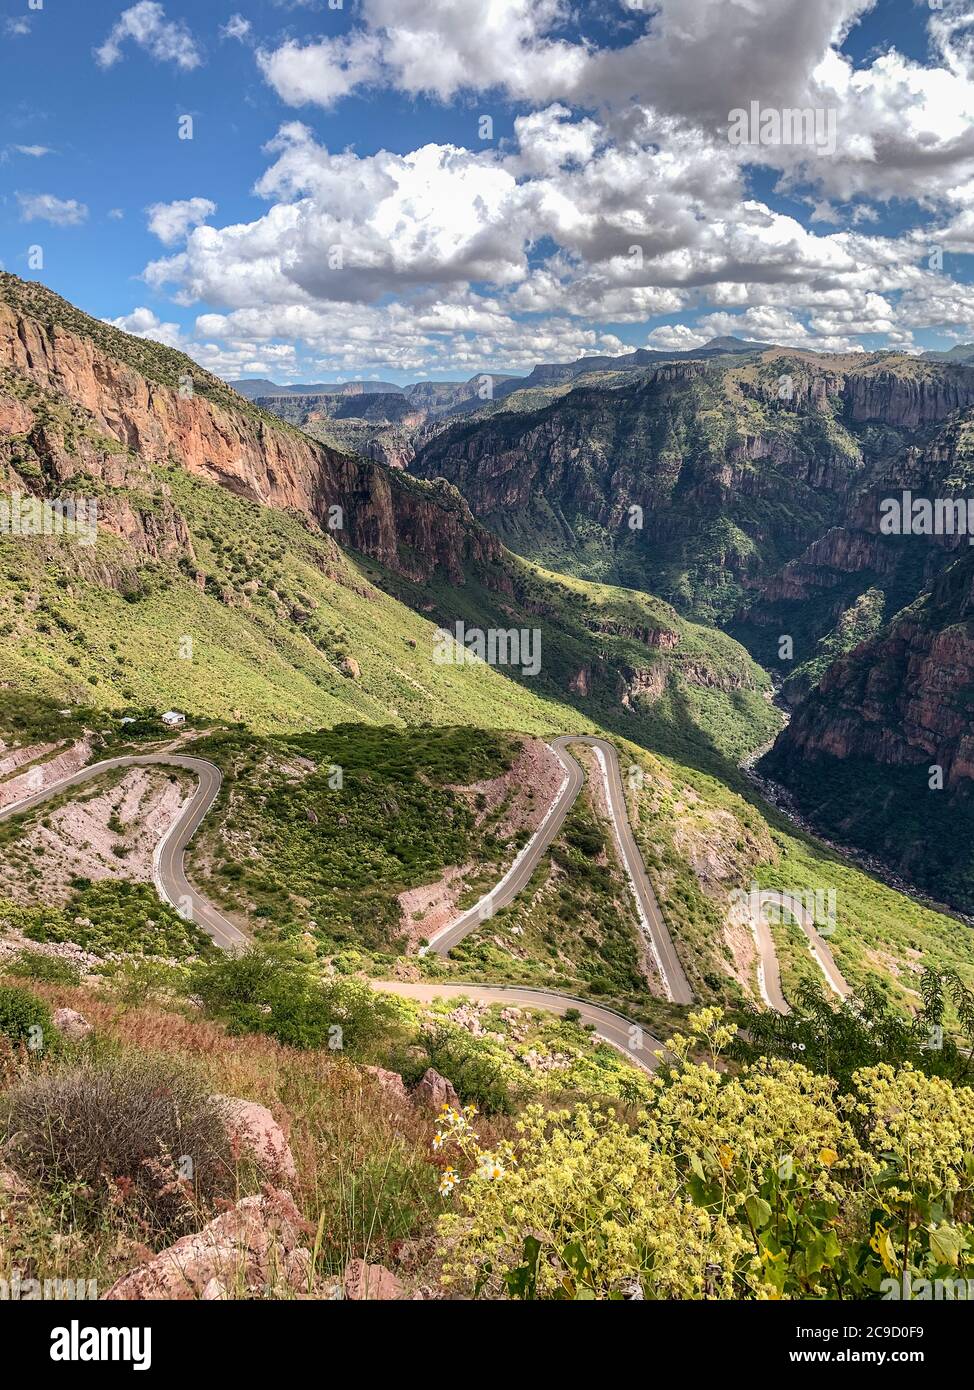 Batopilas Canyon Scenic View, Chihuahua State, Mexico.  Part of the Copper Canyon Complex. Stock Photo